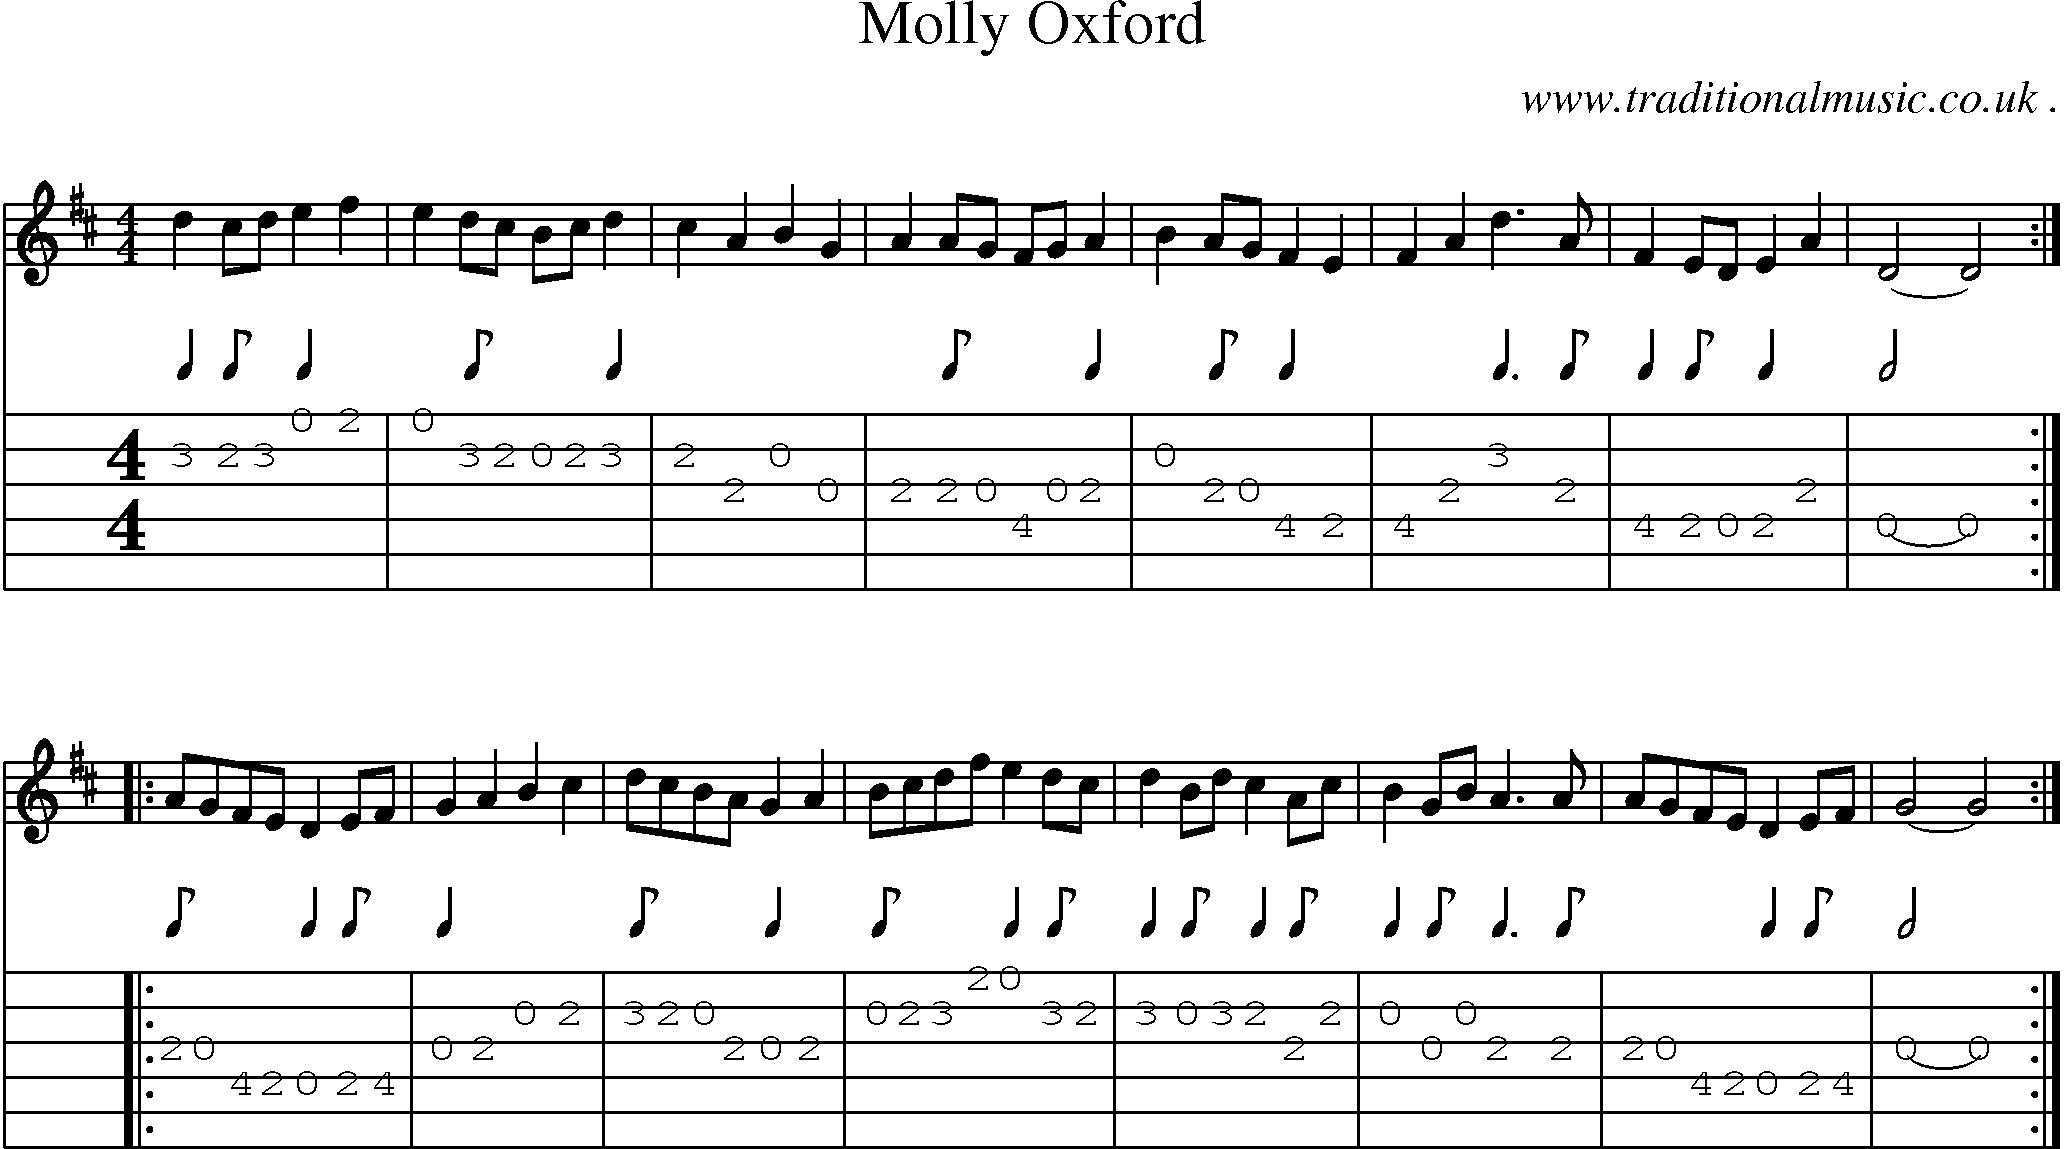 Sheet-Music and Guitar Tabs for Molly Oxford